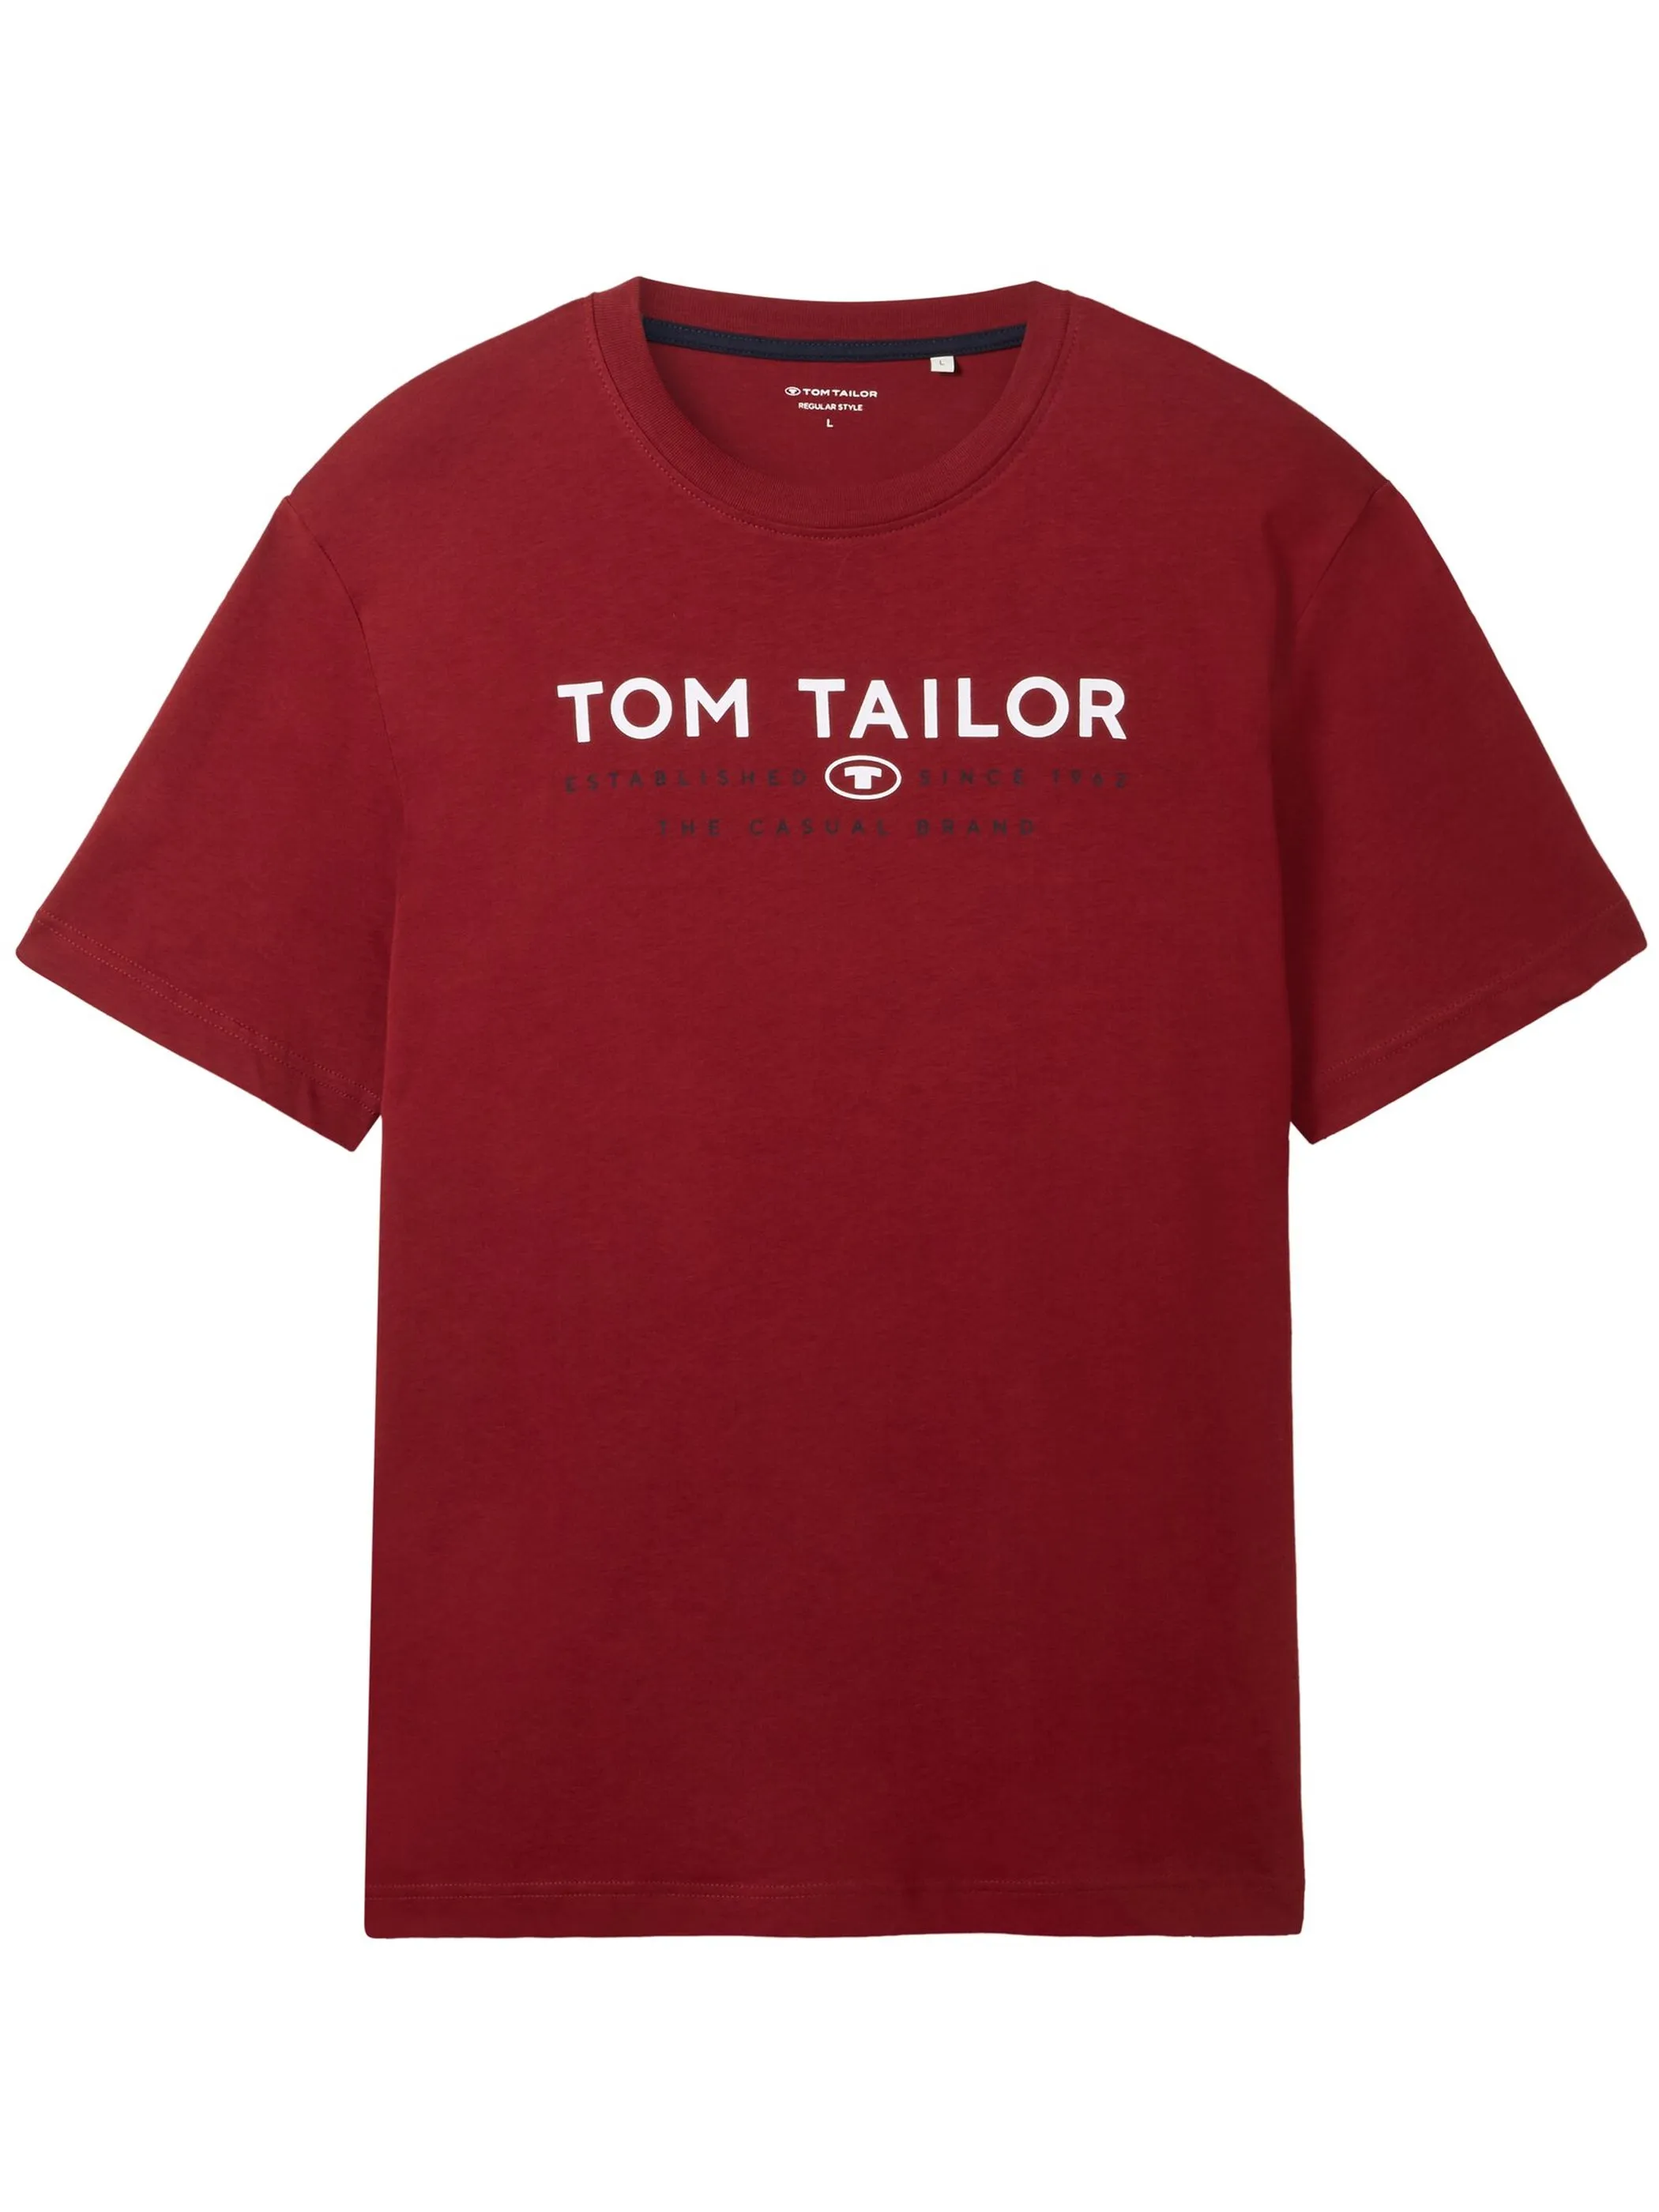 Tom Tailor 1043276 t-shirt with print Rot 898849 13721 1